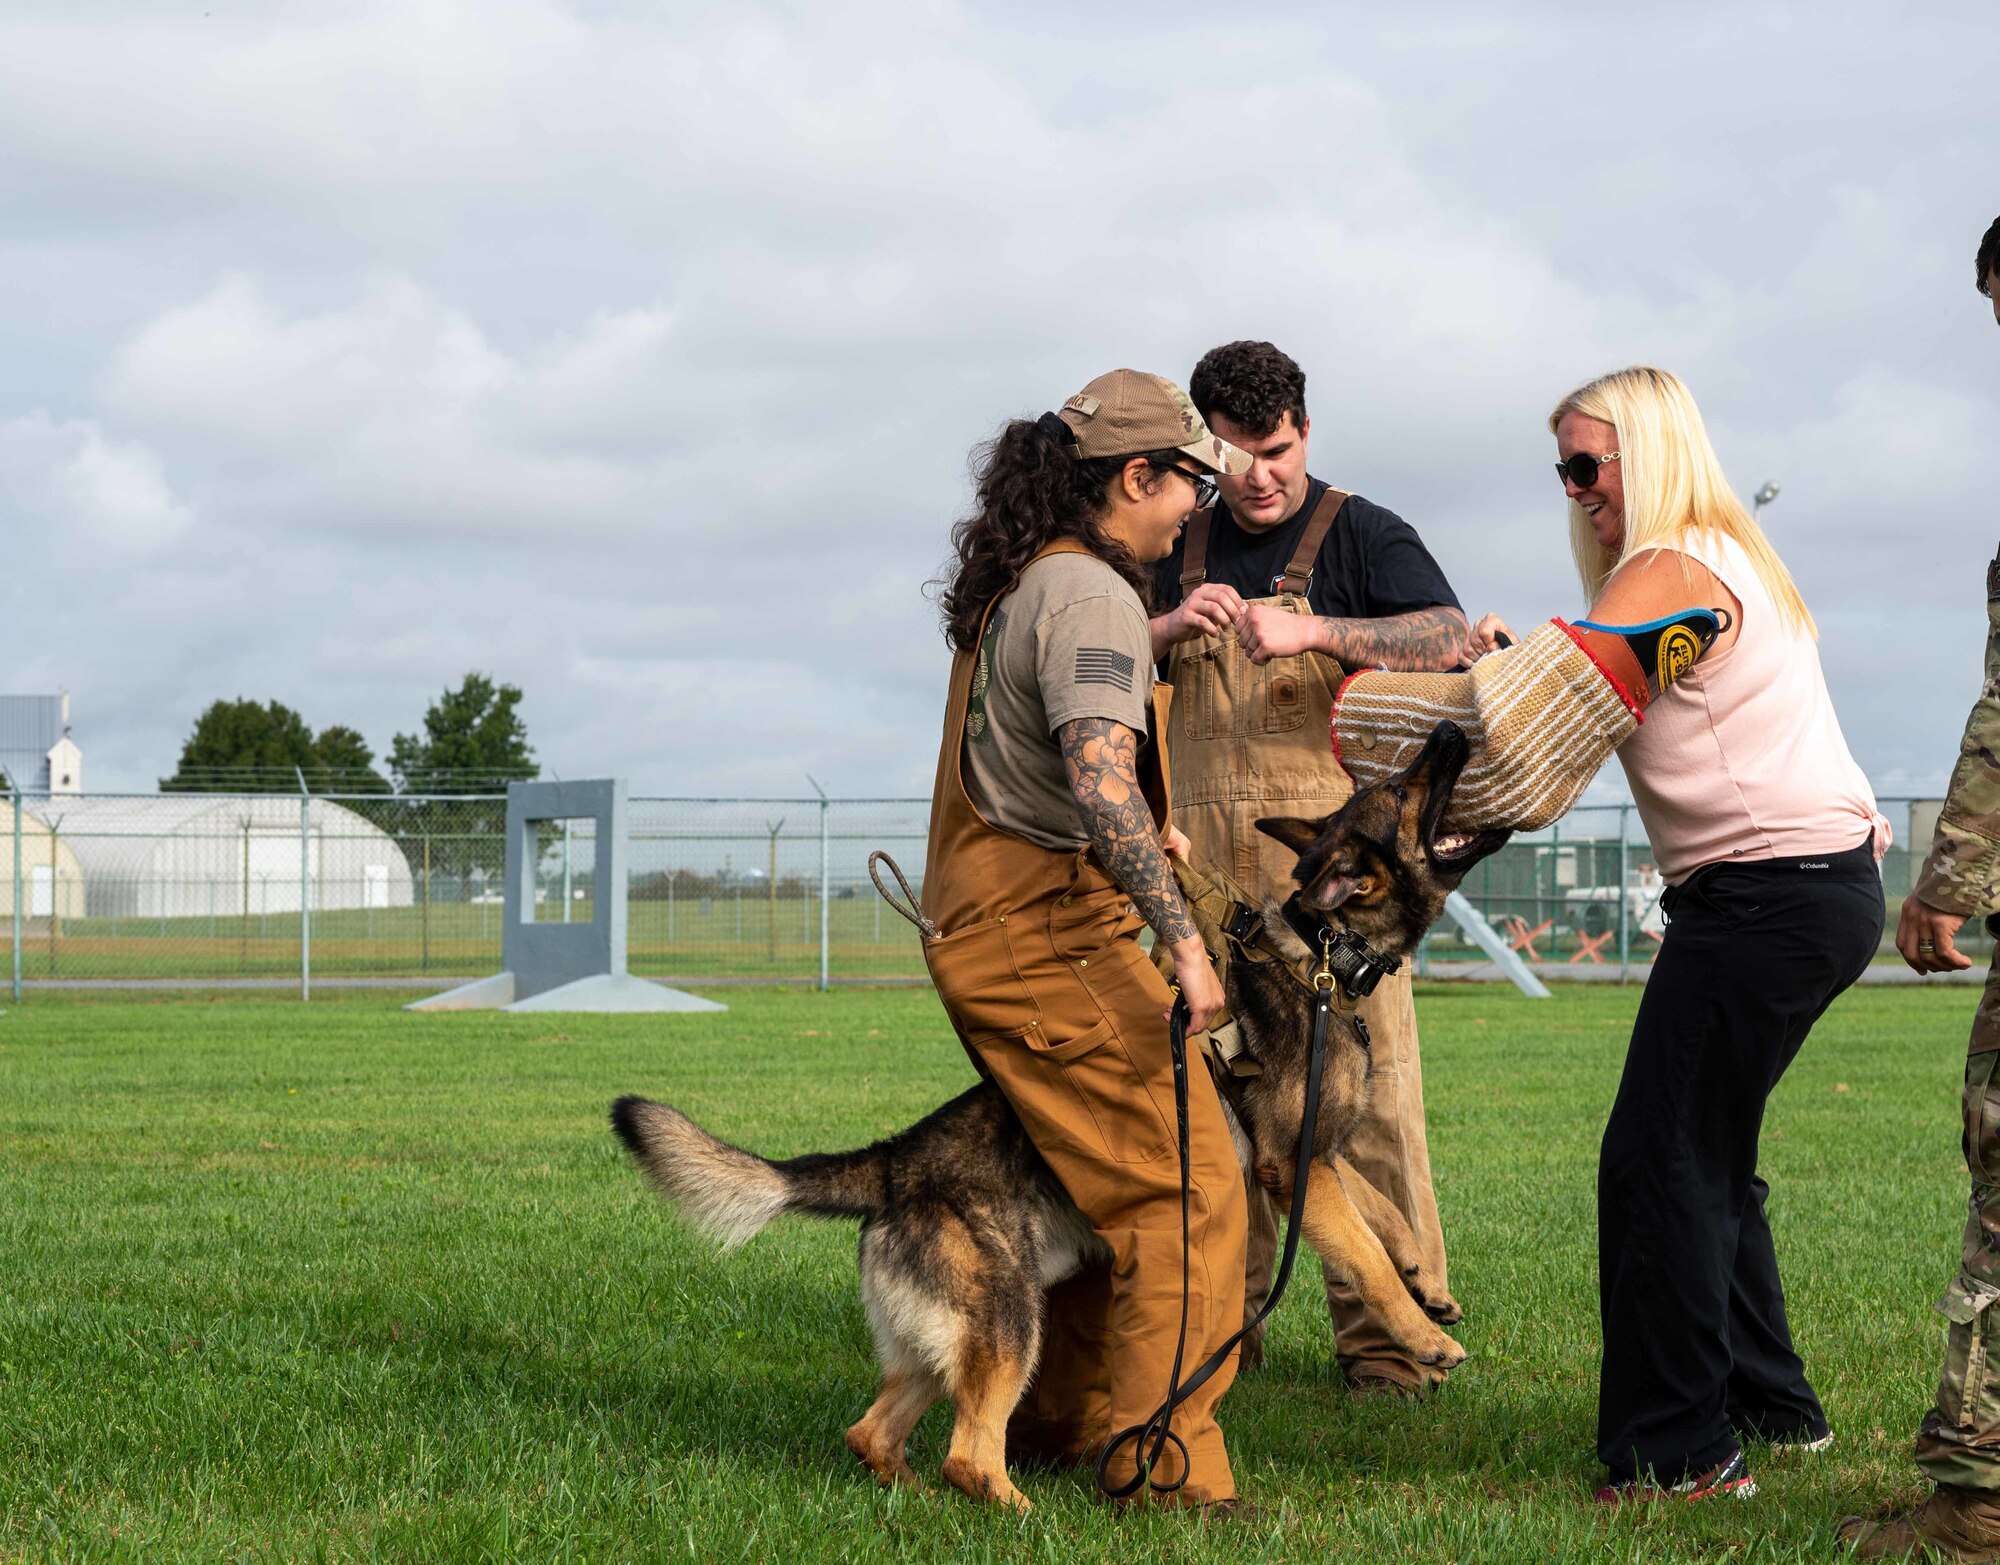 Sandy Unkrur, Dover Air Force Base key spouse, participates in a military working dog demo during a key spouse immersion tour at Dover AFB, Delaware, Oct. 13, 2021. The tour featured facilities around base such as the Bedrock Innovation Lab, military working dog kennels and Air Force Mortuary Affairs Operations. The immersion aimed to familiarize and better equip spouses in assisting Airmen and their families. (U.S. Air Force photo by Senior Airman Faith Schaefer)